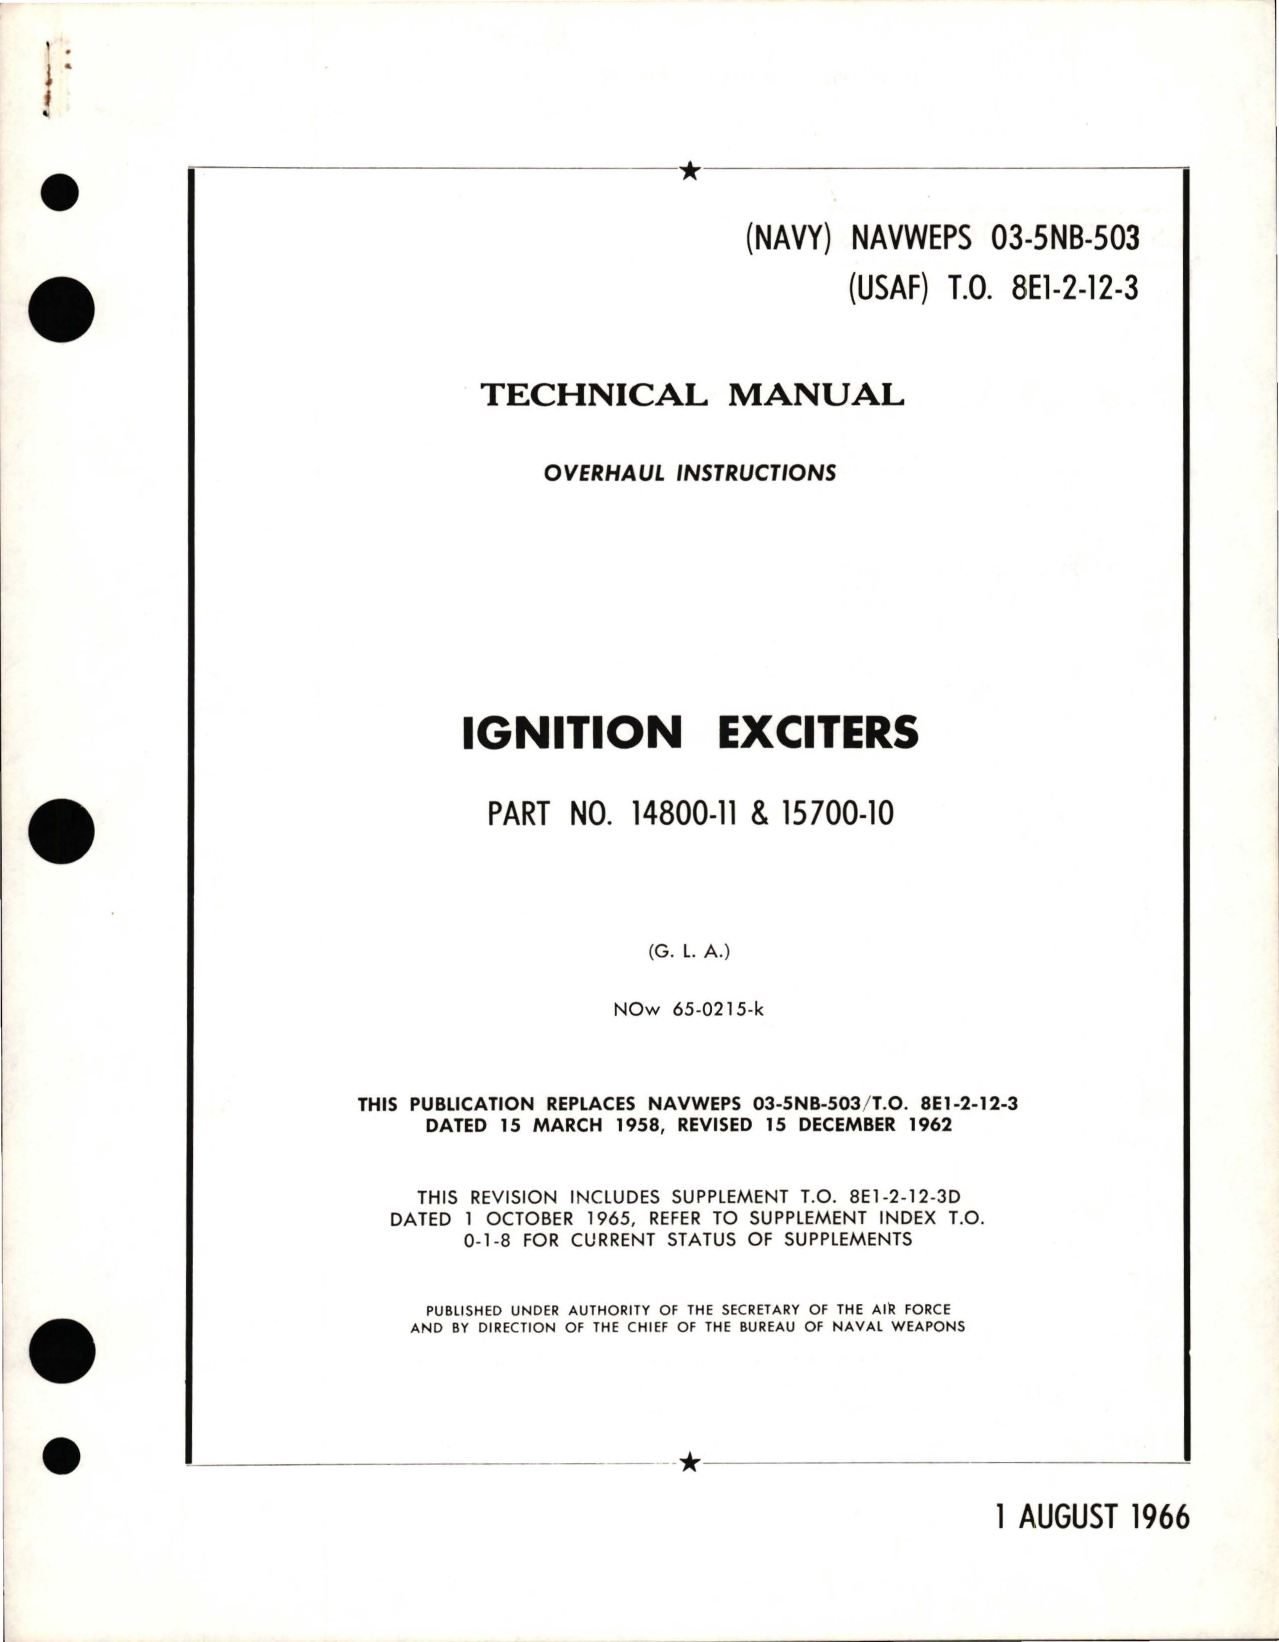 Sample page 1 from AirCorps Library document: Overhaul Instructions for Ignition Exciters - Parts 14800-11 and 15700-10 